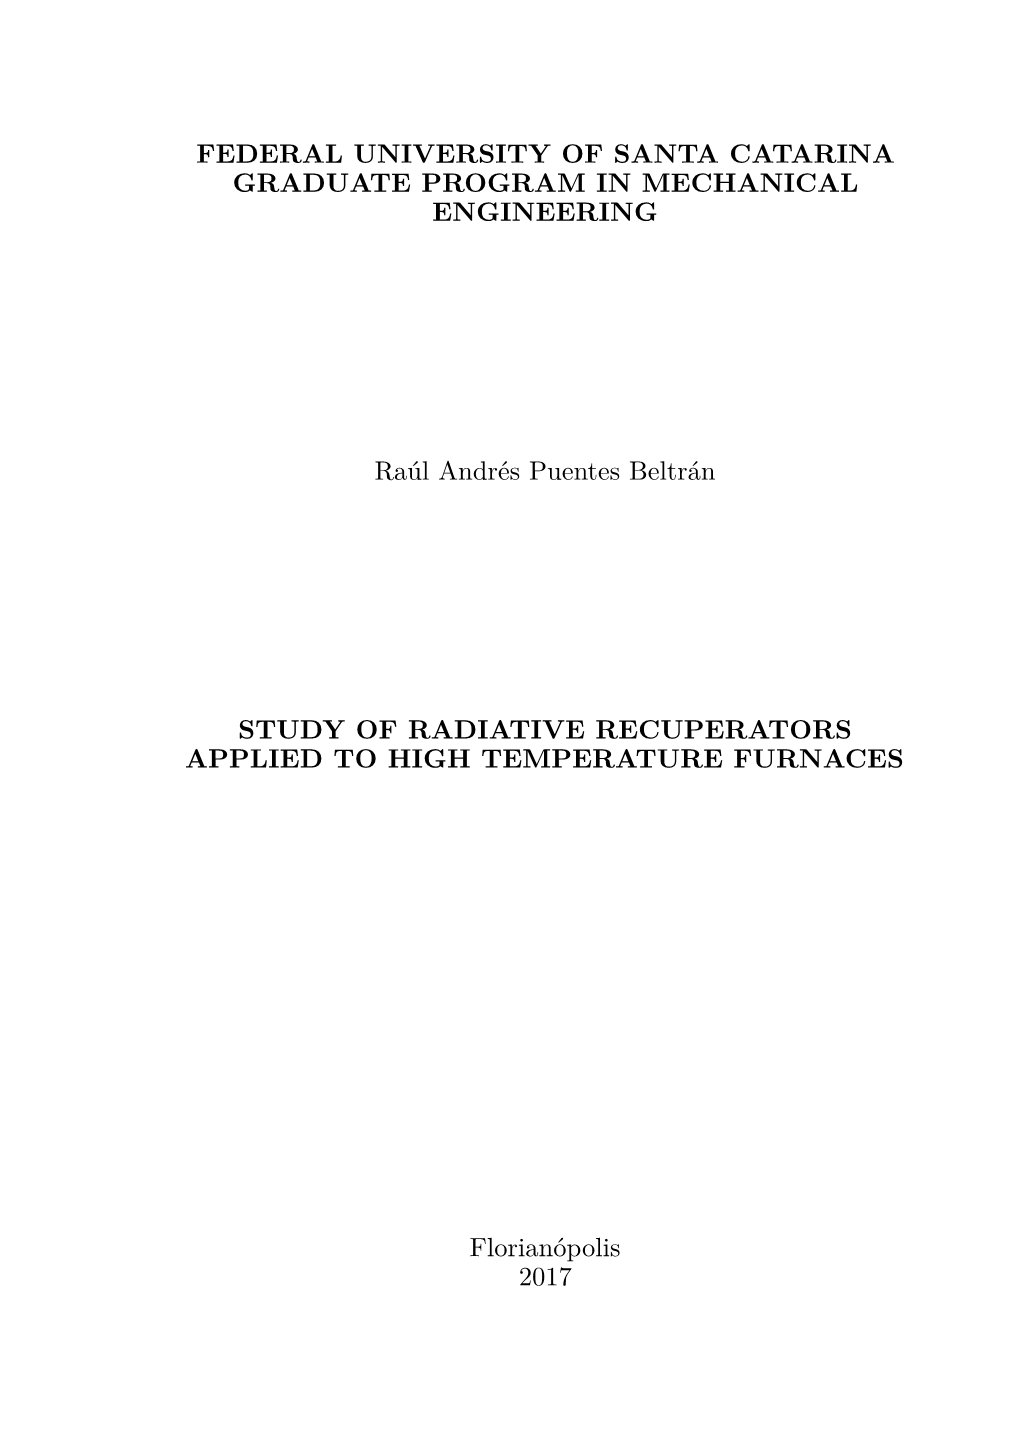 Study of Radiative Recuperators Applied to High Temperature Furnaces